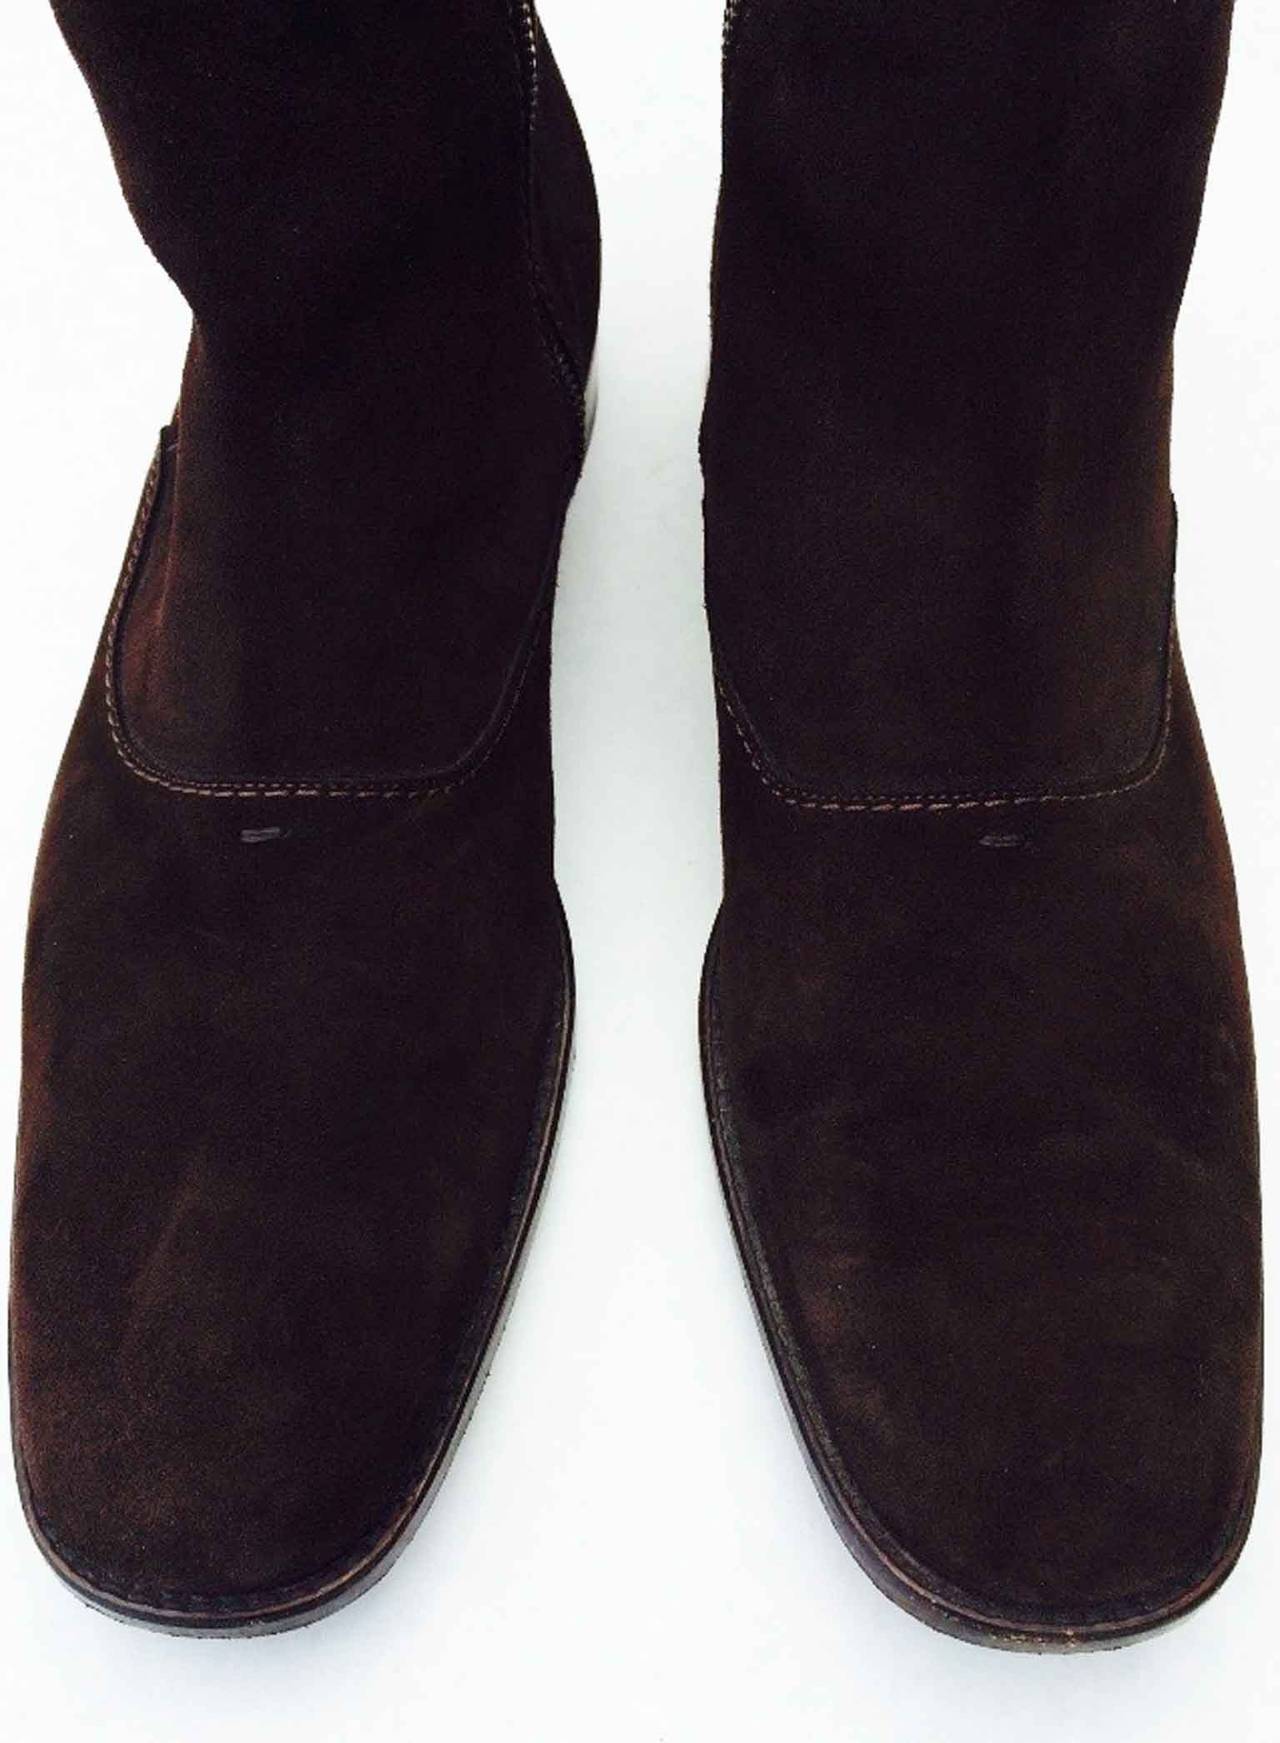 A fine pair Louis Vuitton suede ankle boots. Hard to source gents size 12. Items feature brown suede uppers, leather soles and 1